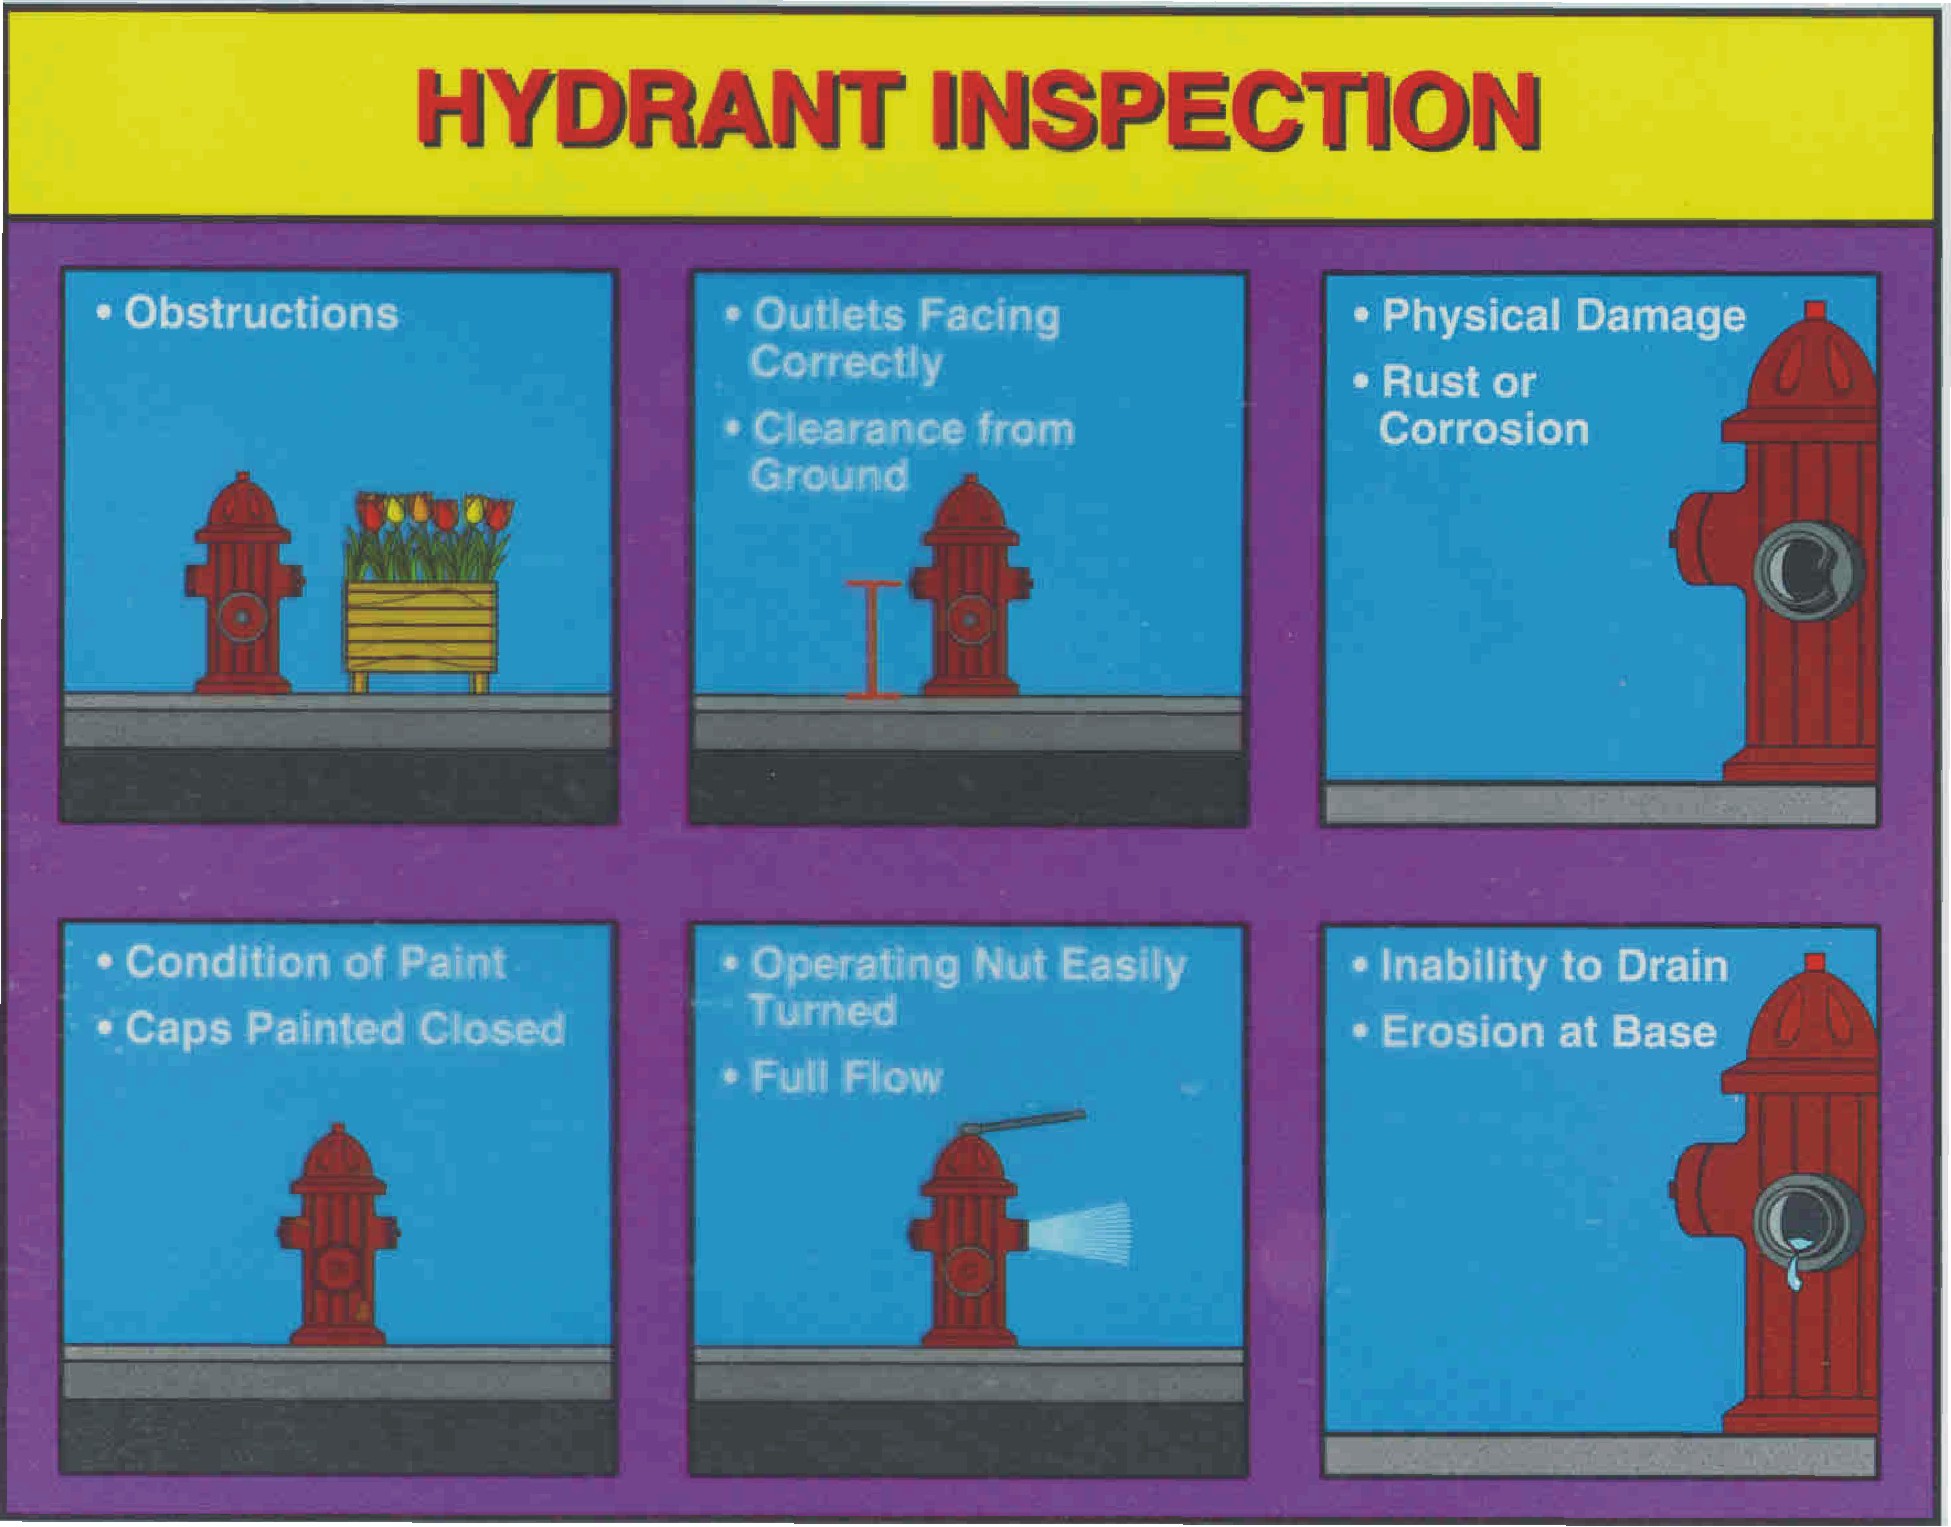 Hydrant inspection